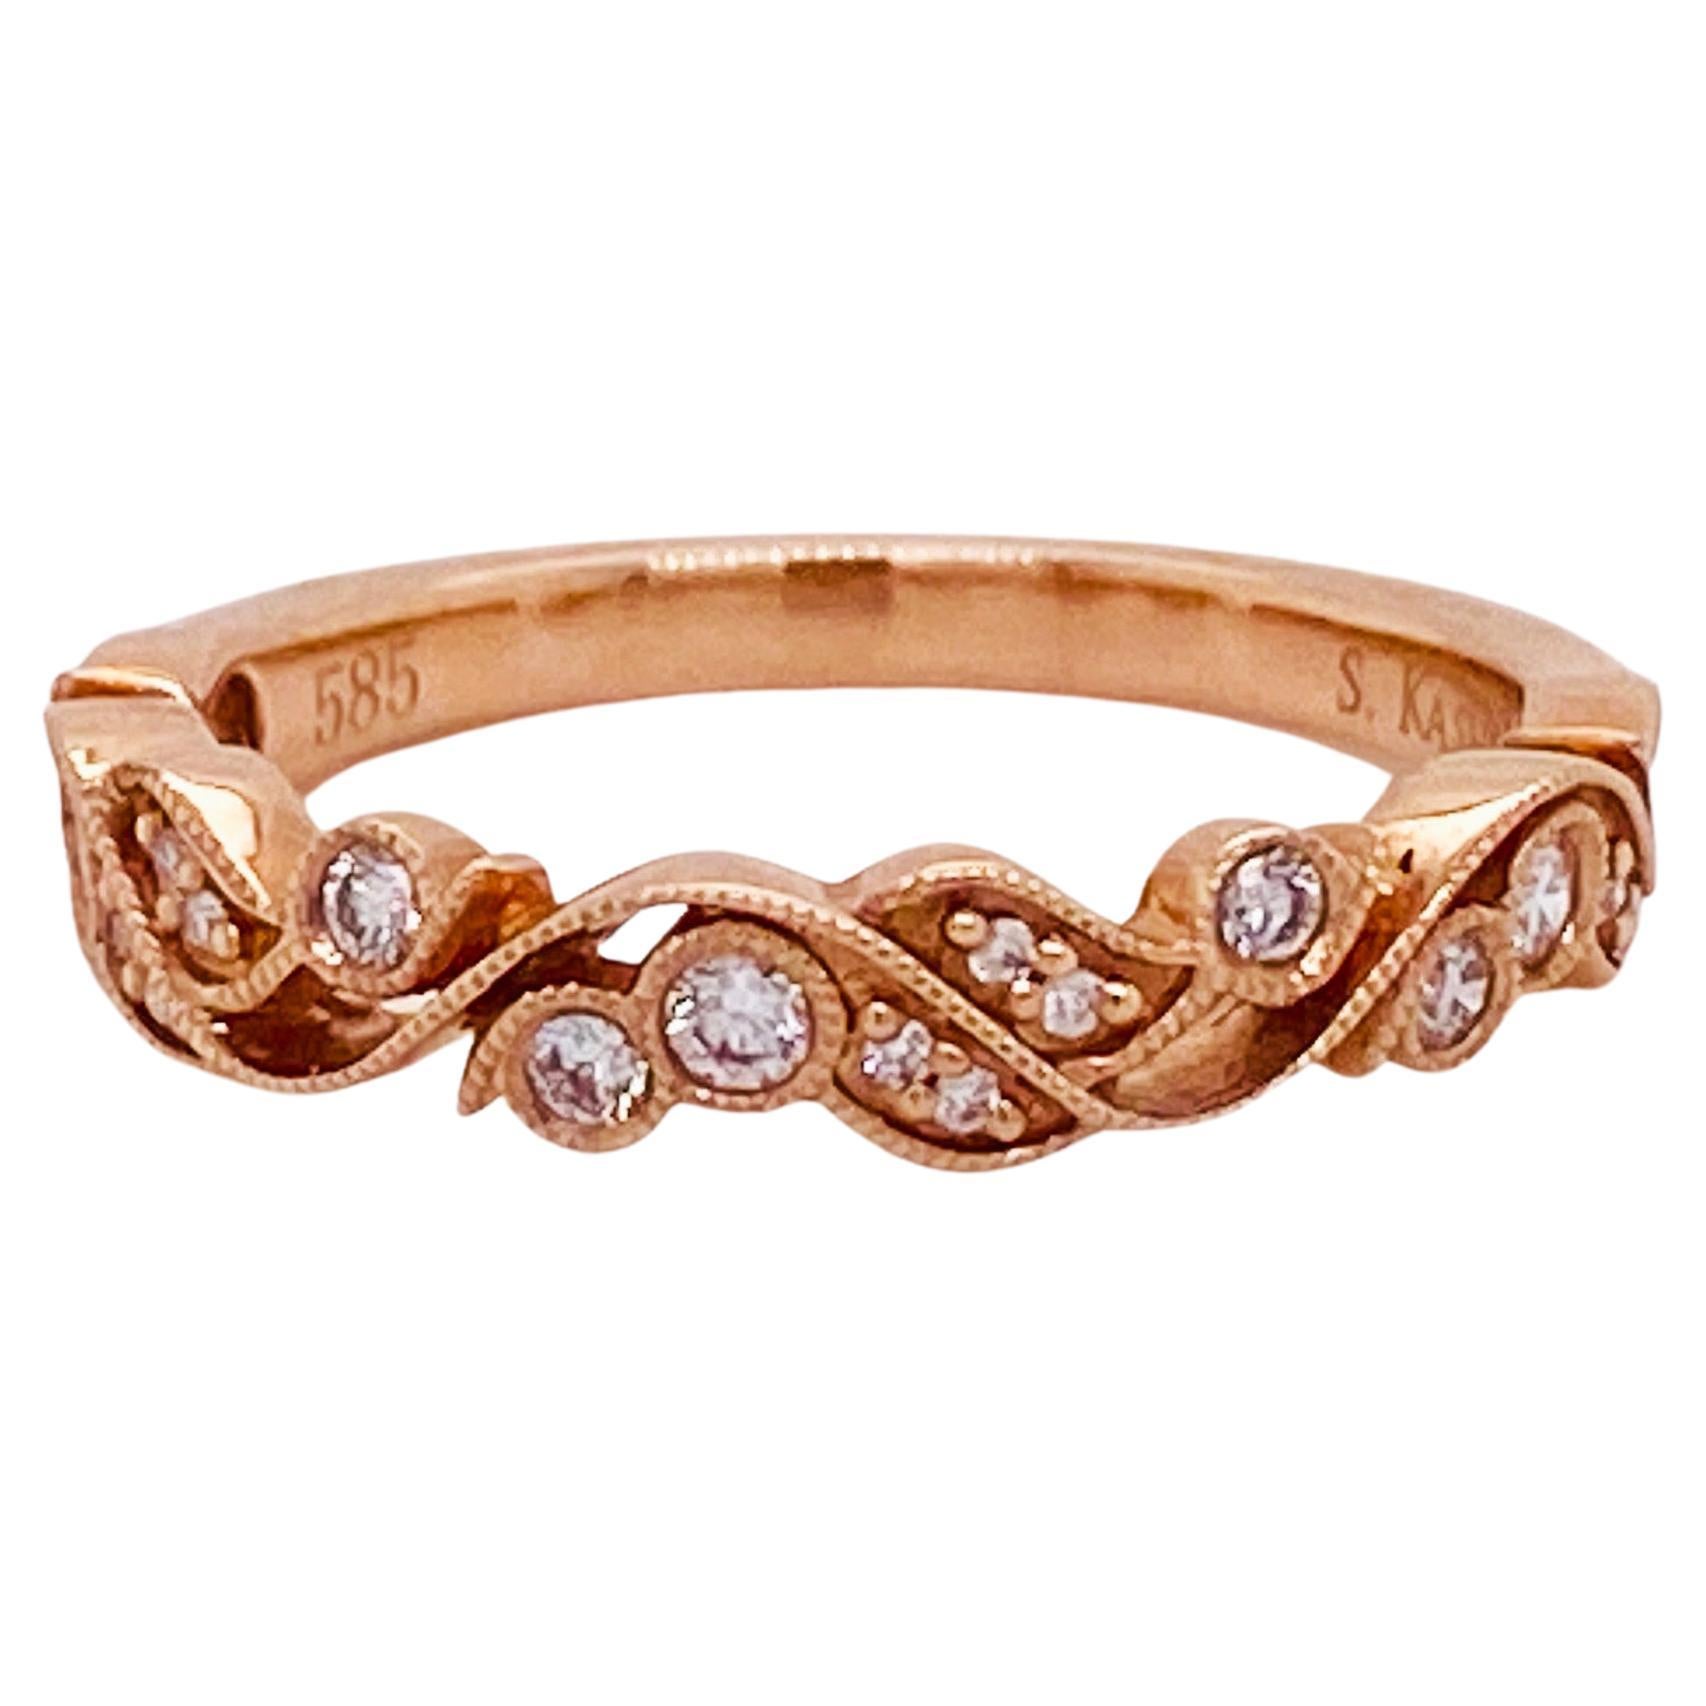 Leaf and Vine Diamond Ring .16 Carats in Rose Gold Stacking or Wedding Band LV